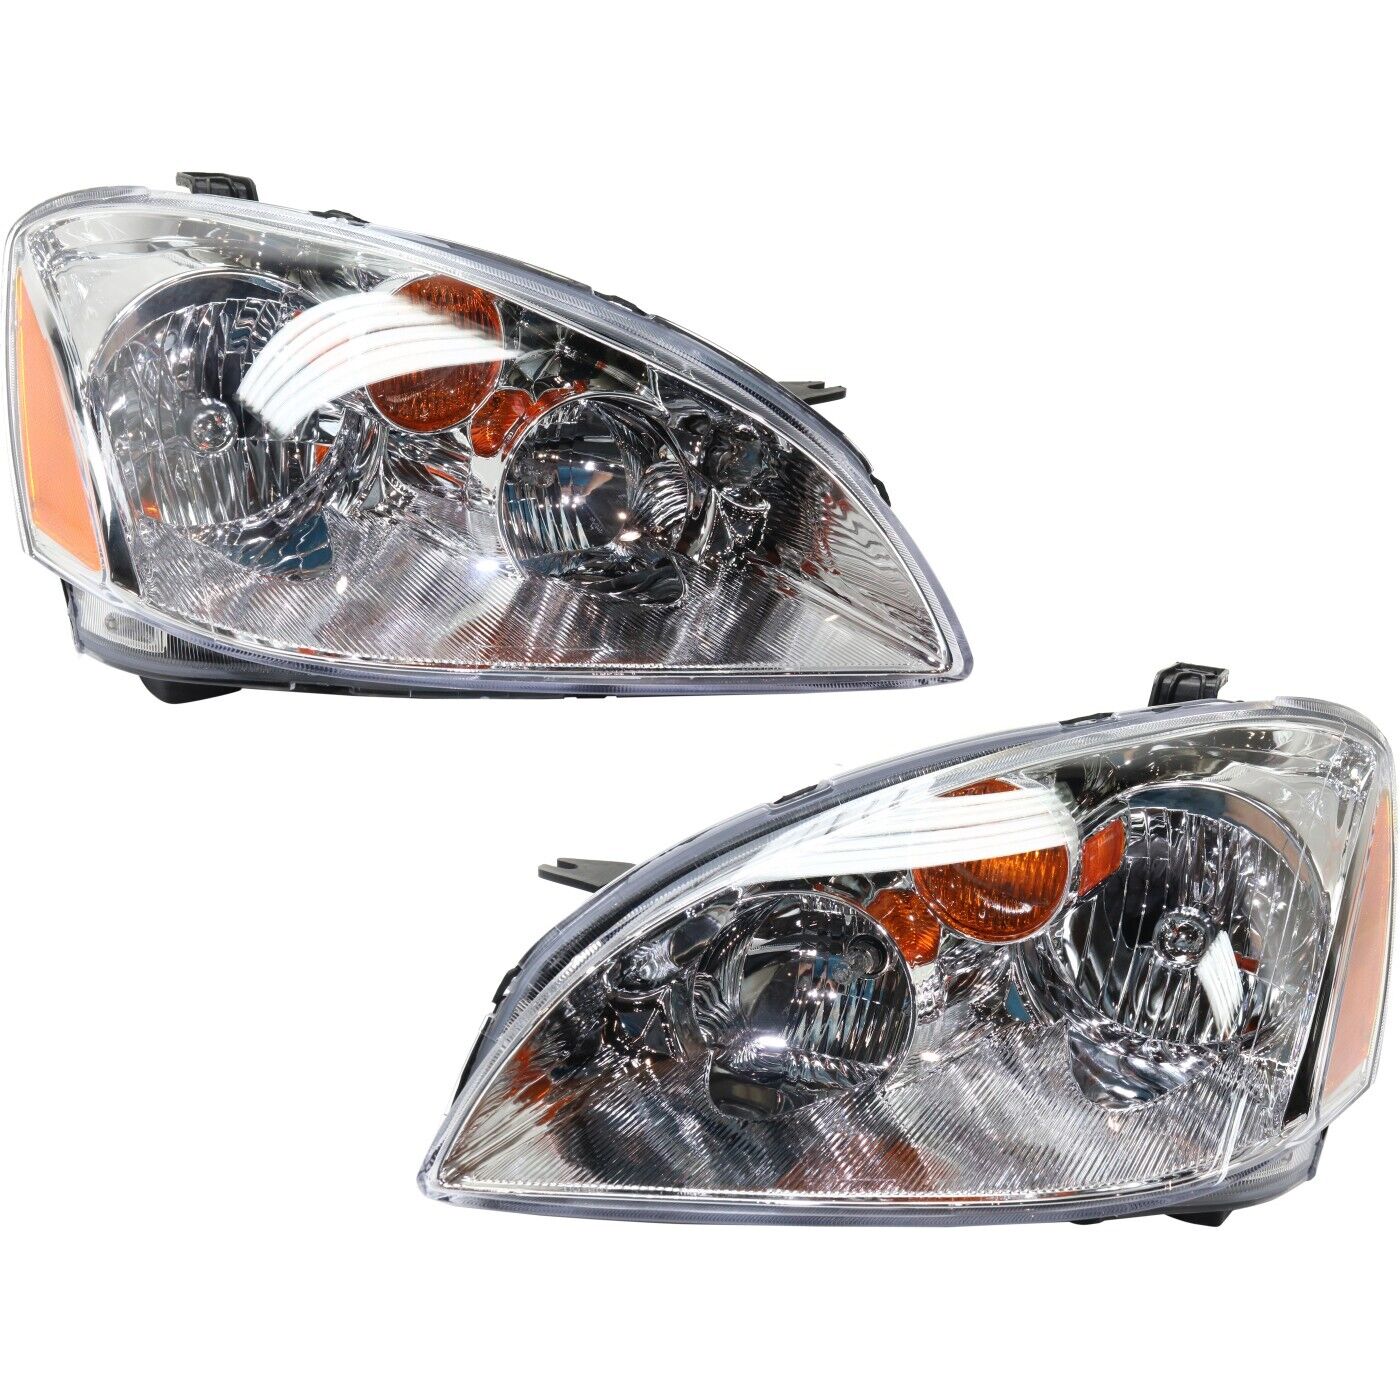 Headlight Set For 2002 2003 2004 Nissan Altima Left and Right With Bulb 2Pc